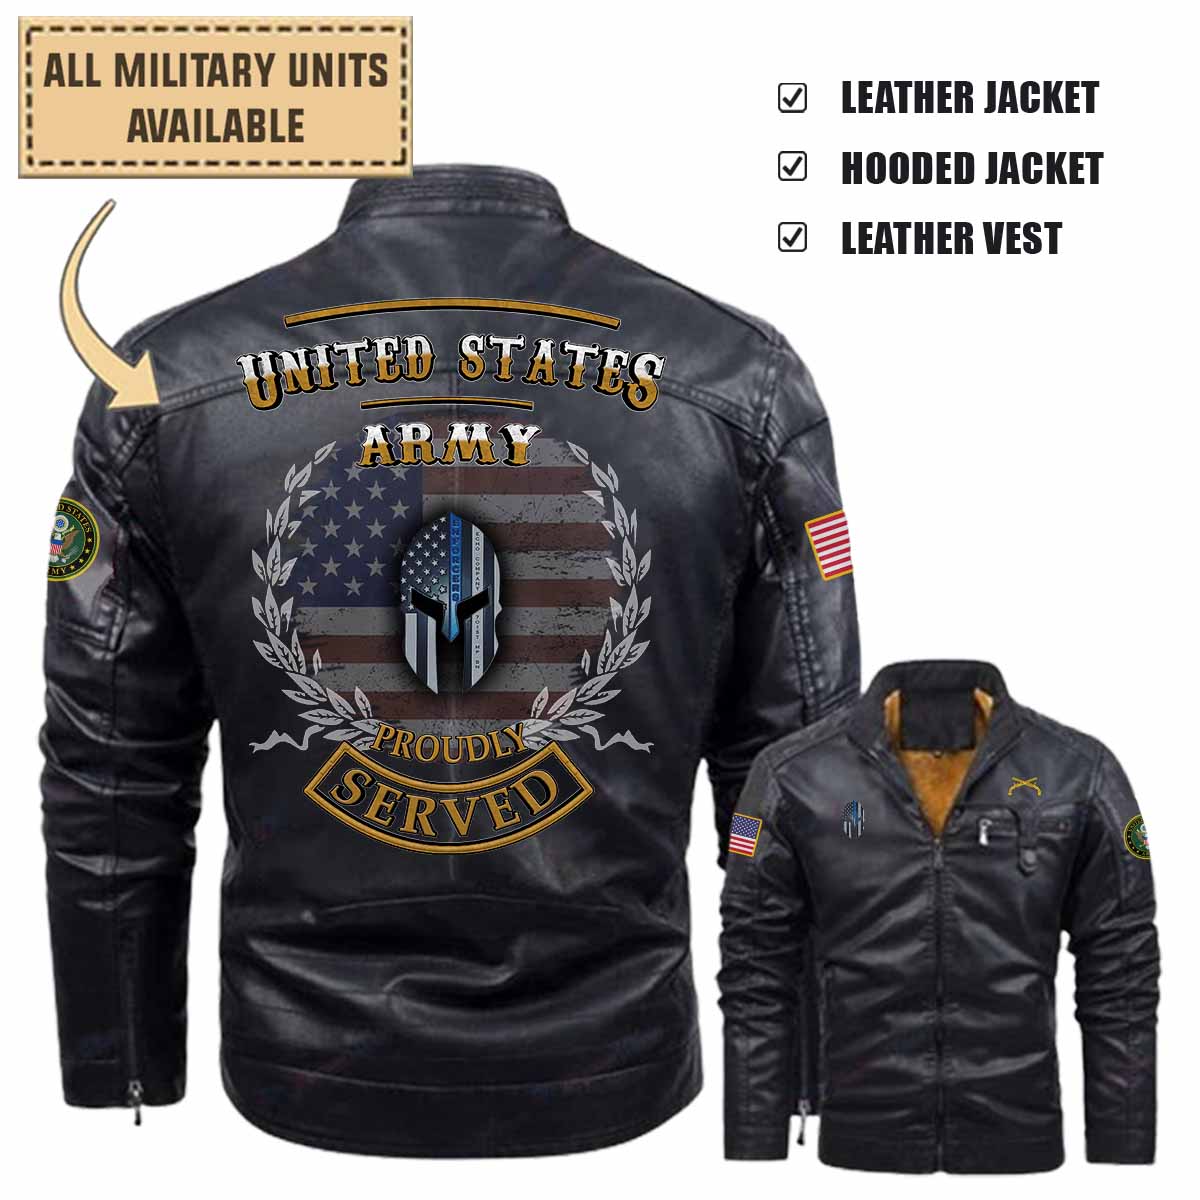 701st MP BN 701st Military Police Battalion, Echo Company_Leather Jacket and Vest